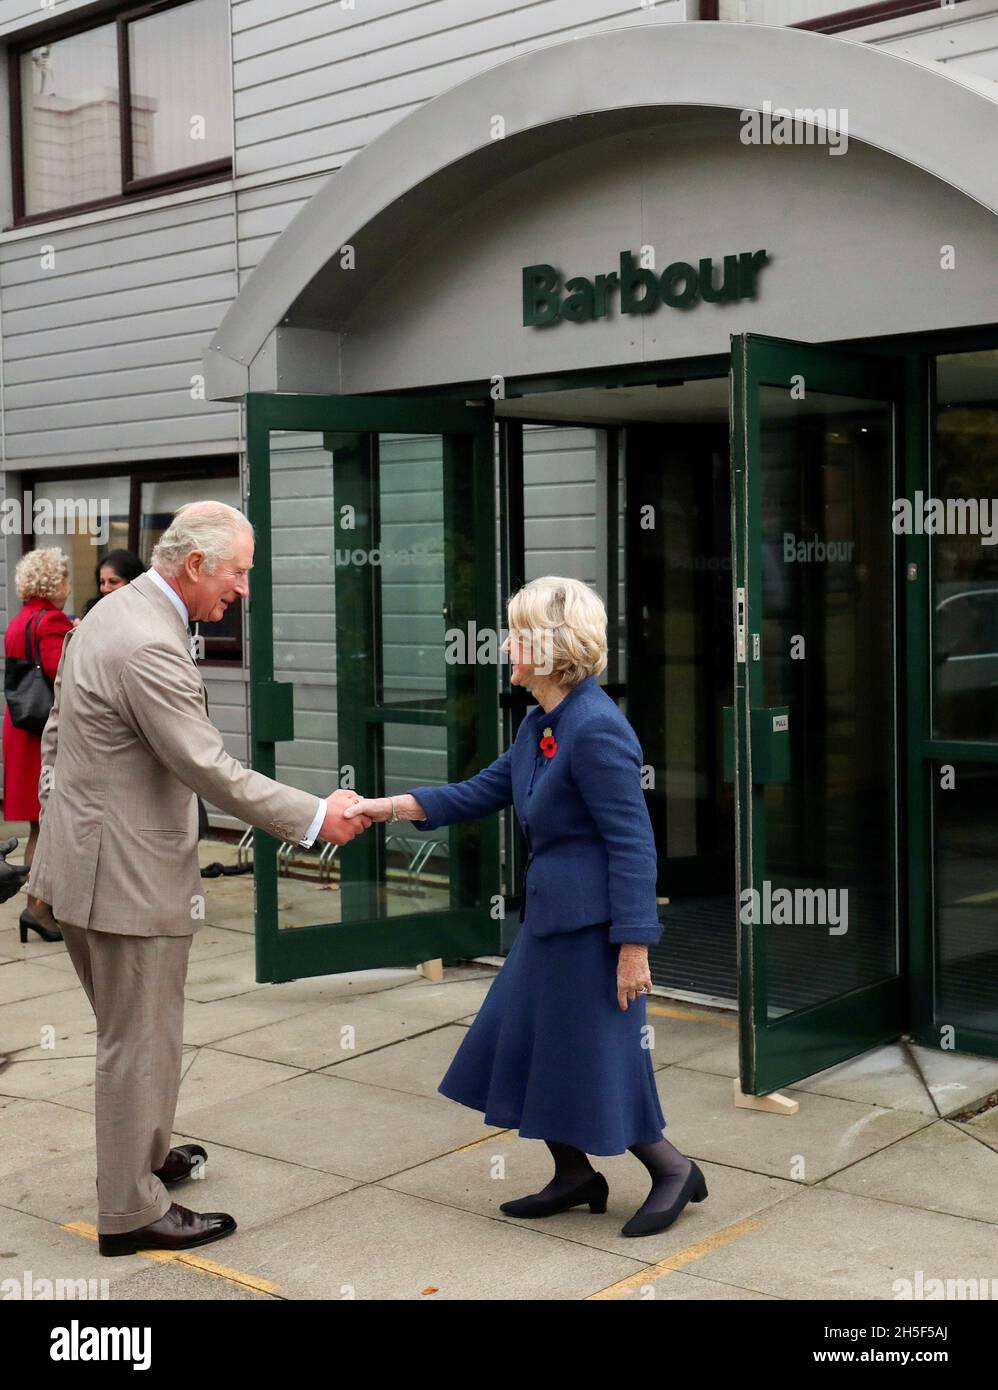 Britain's Prince Charles meets Margaret Barbour as he arrives for a visit  to Royal Warrant Holder, J Barbour And Sons Ltd, in South Shields, Britain  November 9, 2021. Scott Heppell/Pool via REUTERS